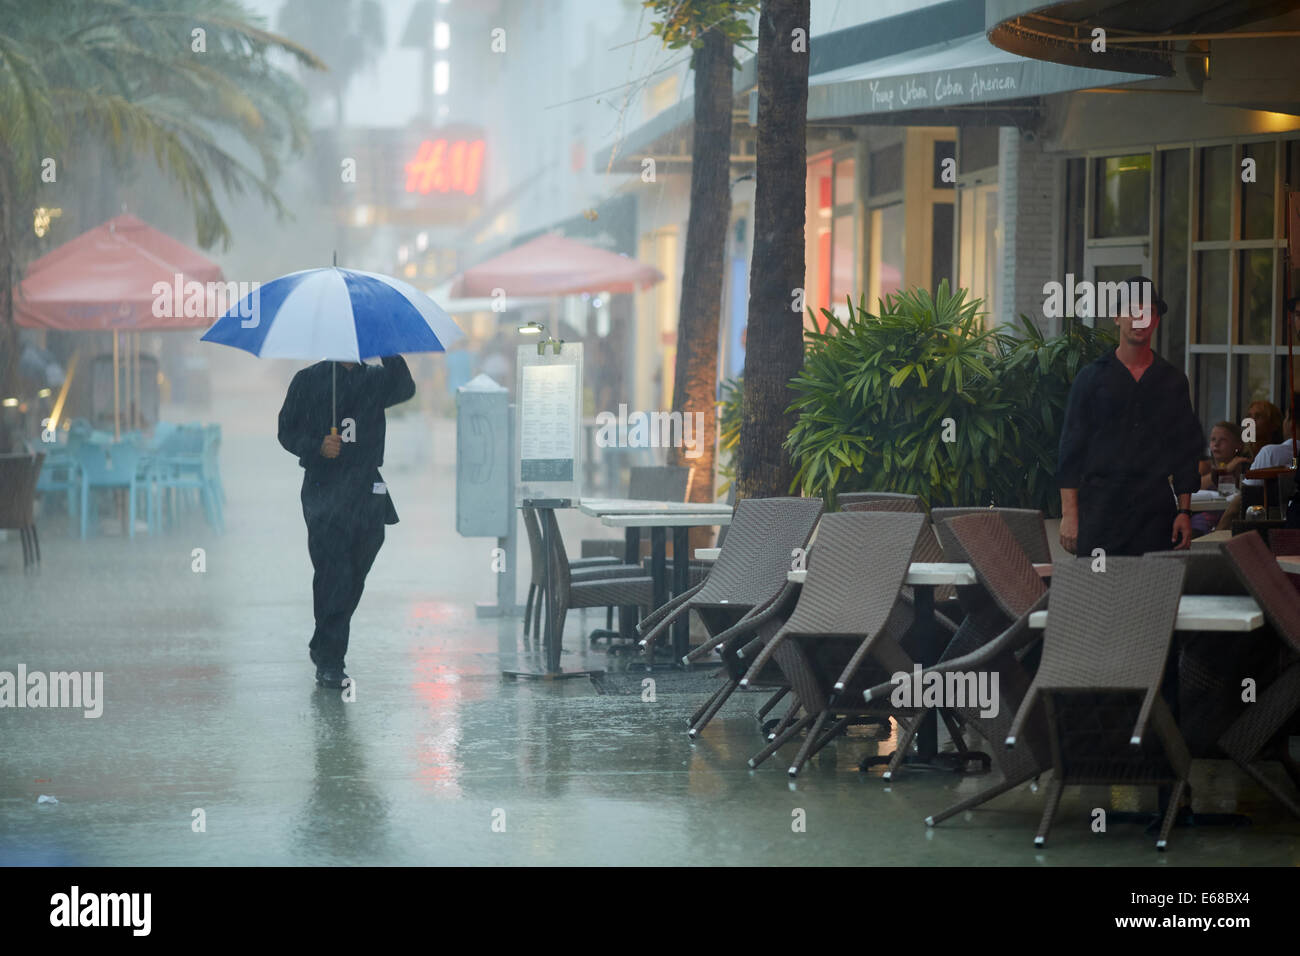 tropical rain storm brings the shops and restaurants to a stop, pictured a waiter still working be spite the rain Stock Photo